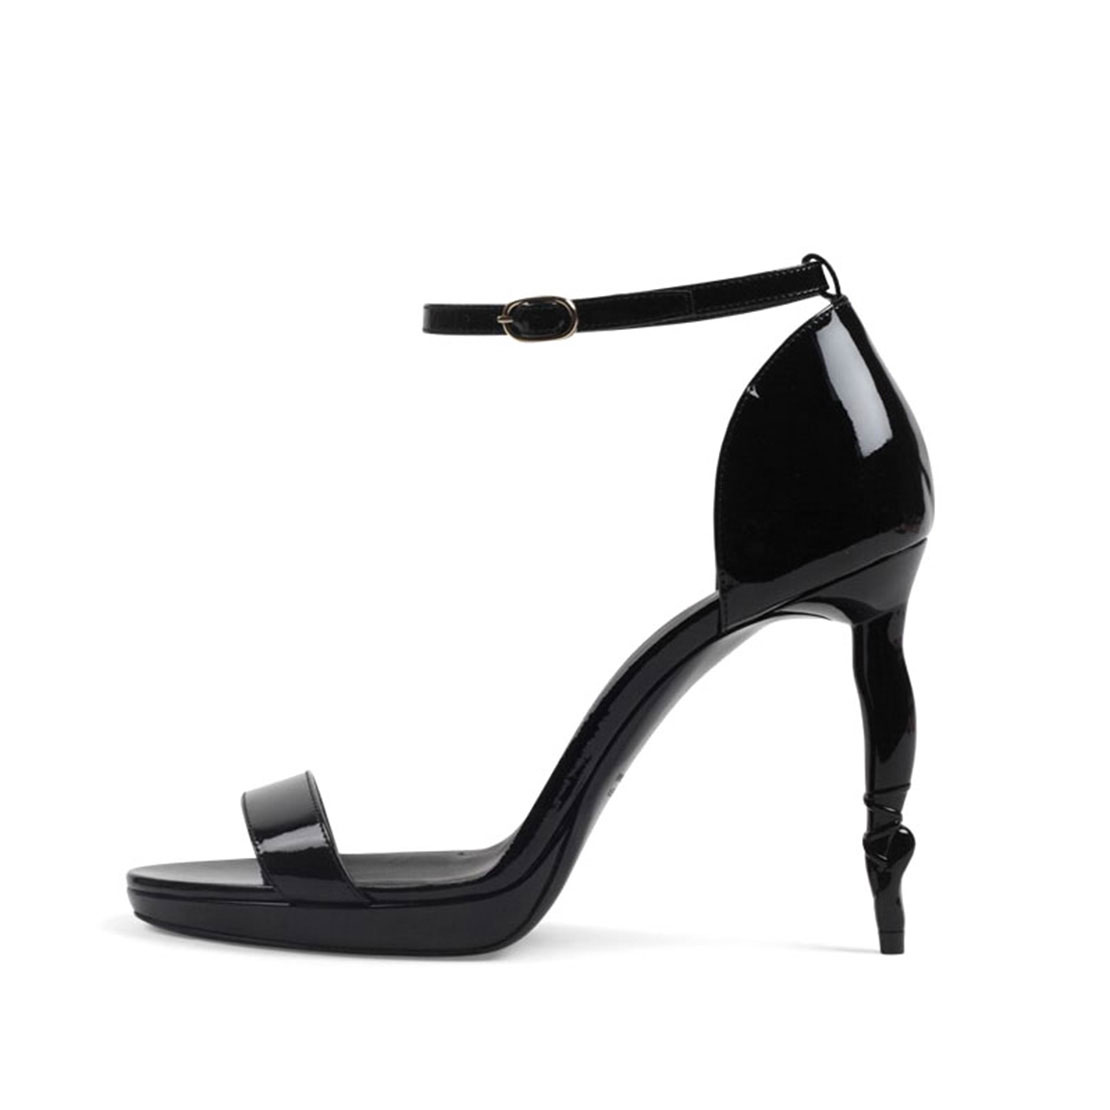 Special heels design ankle strap sandals women shoes YB3025